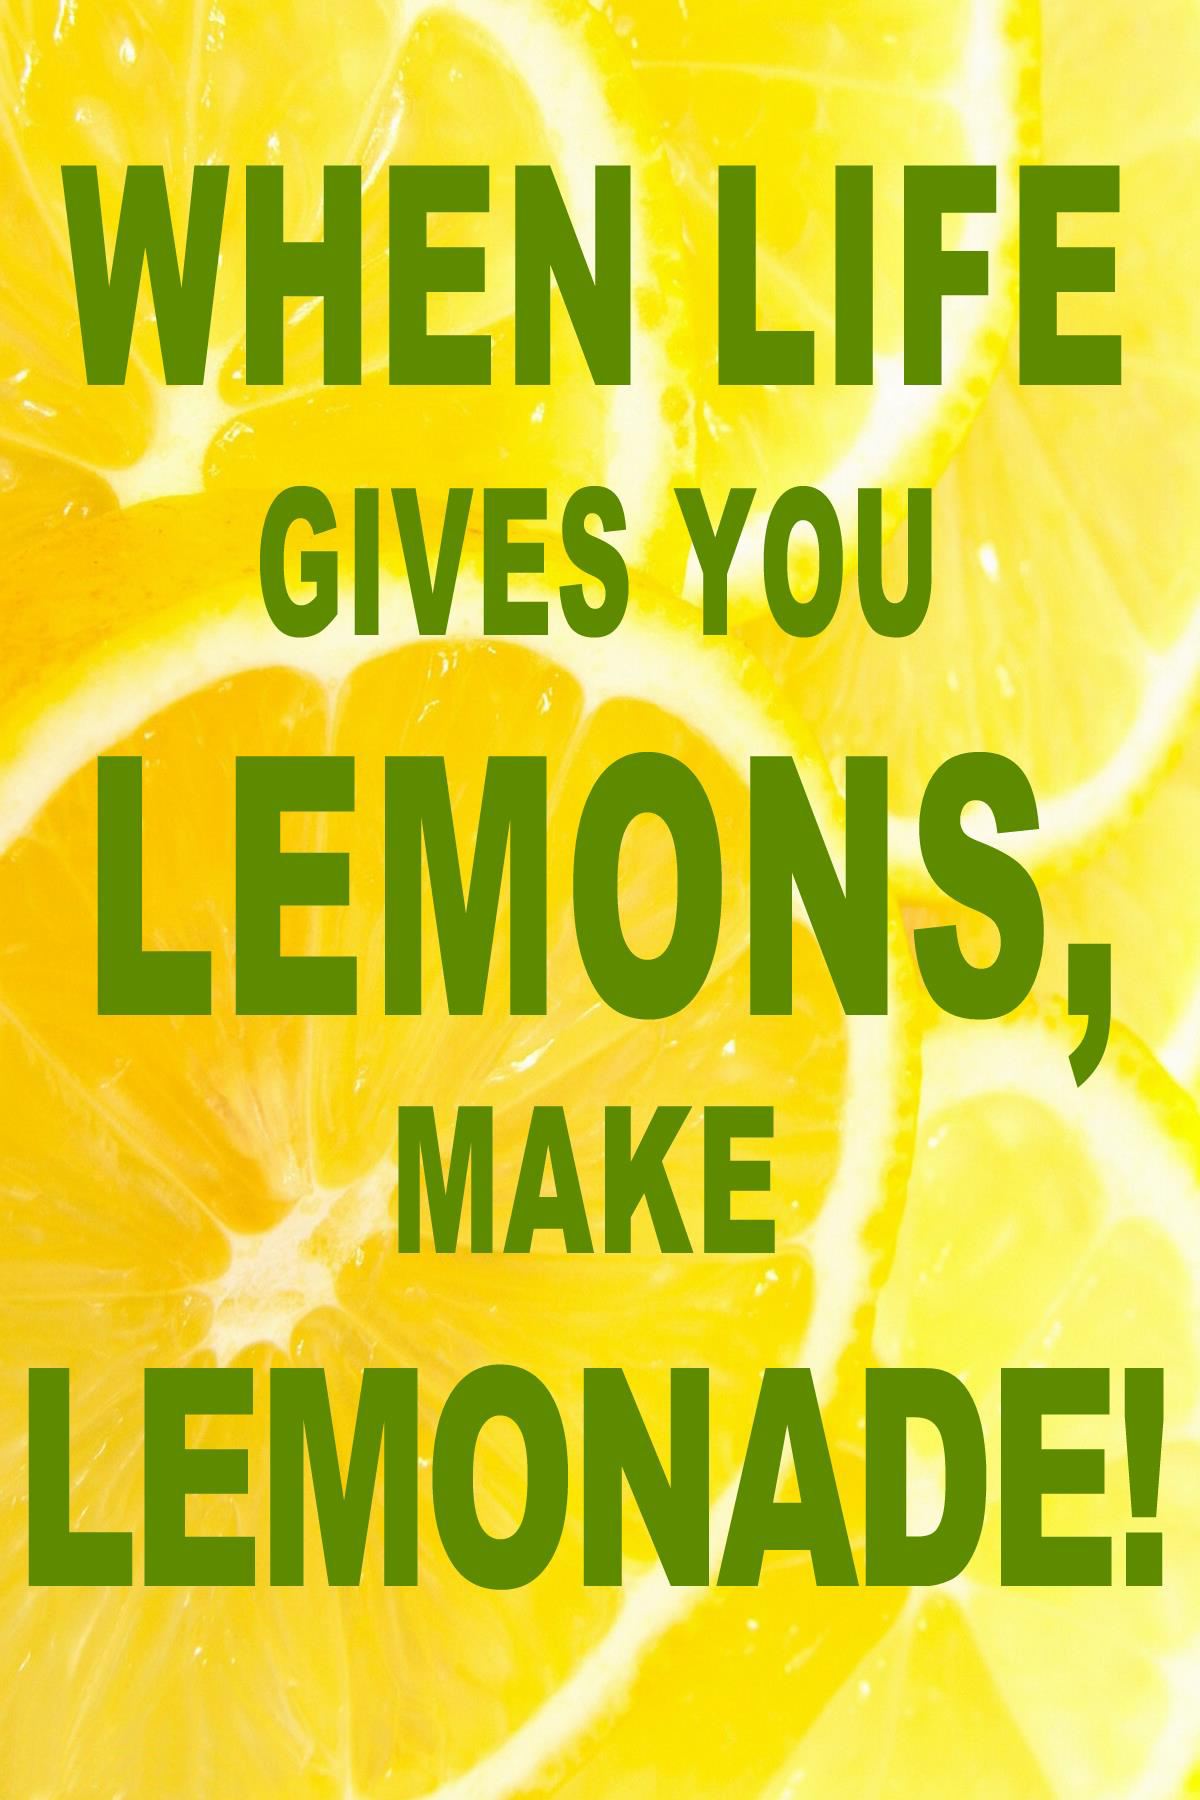 When Life Gives You Lemons Funny Quotes Quotesgram 